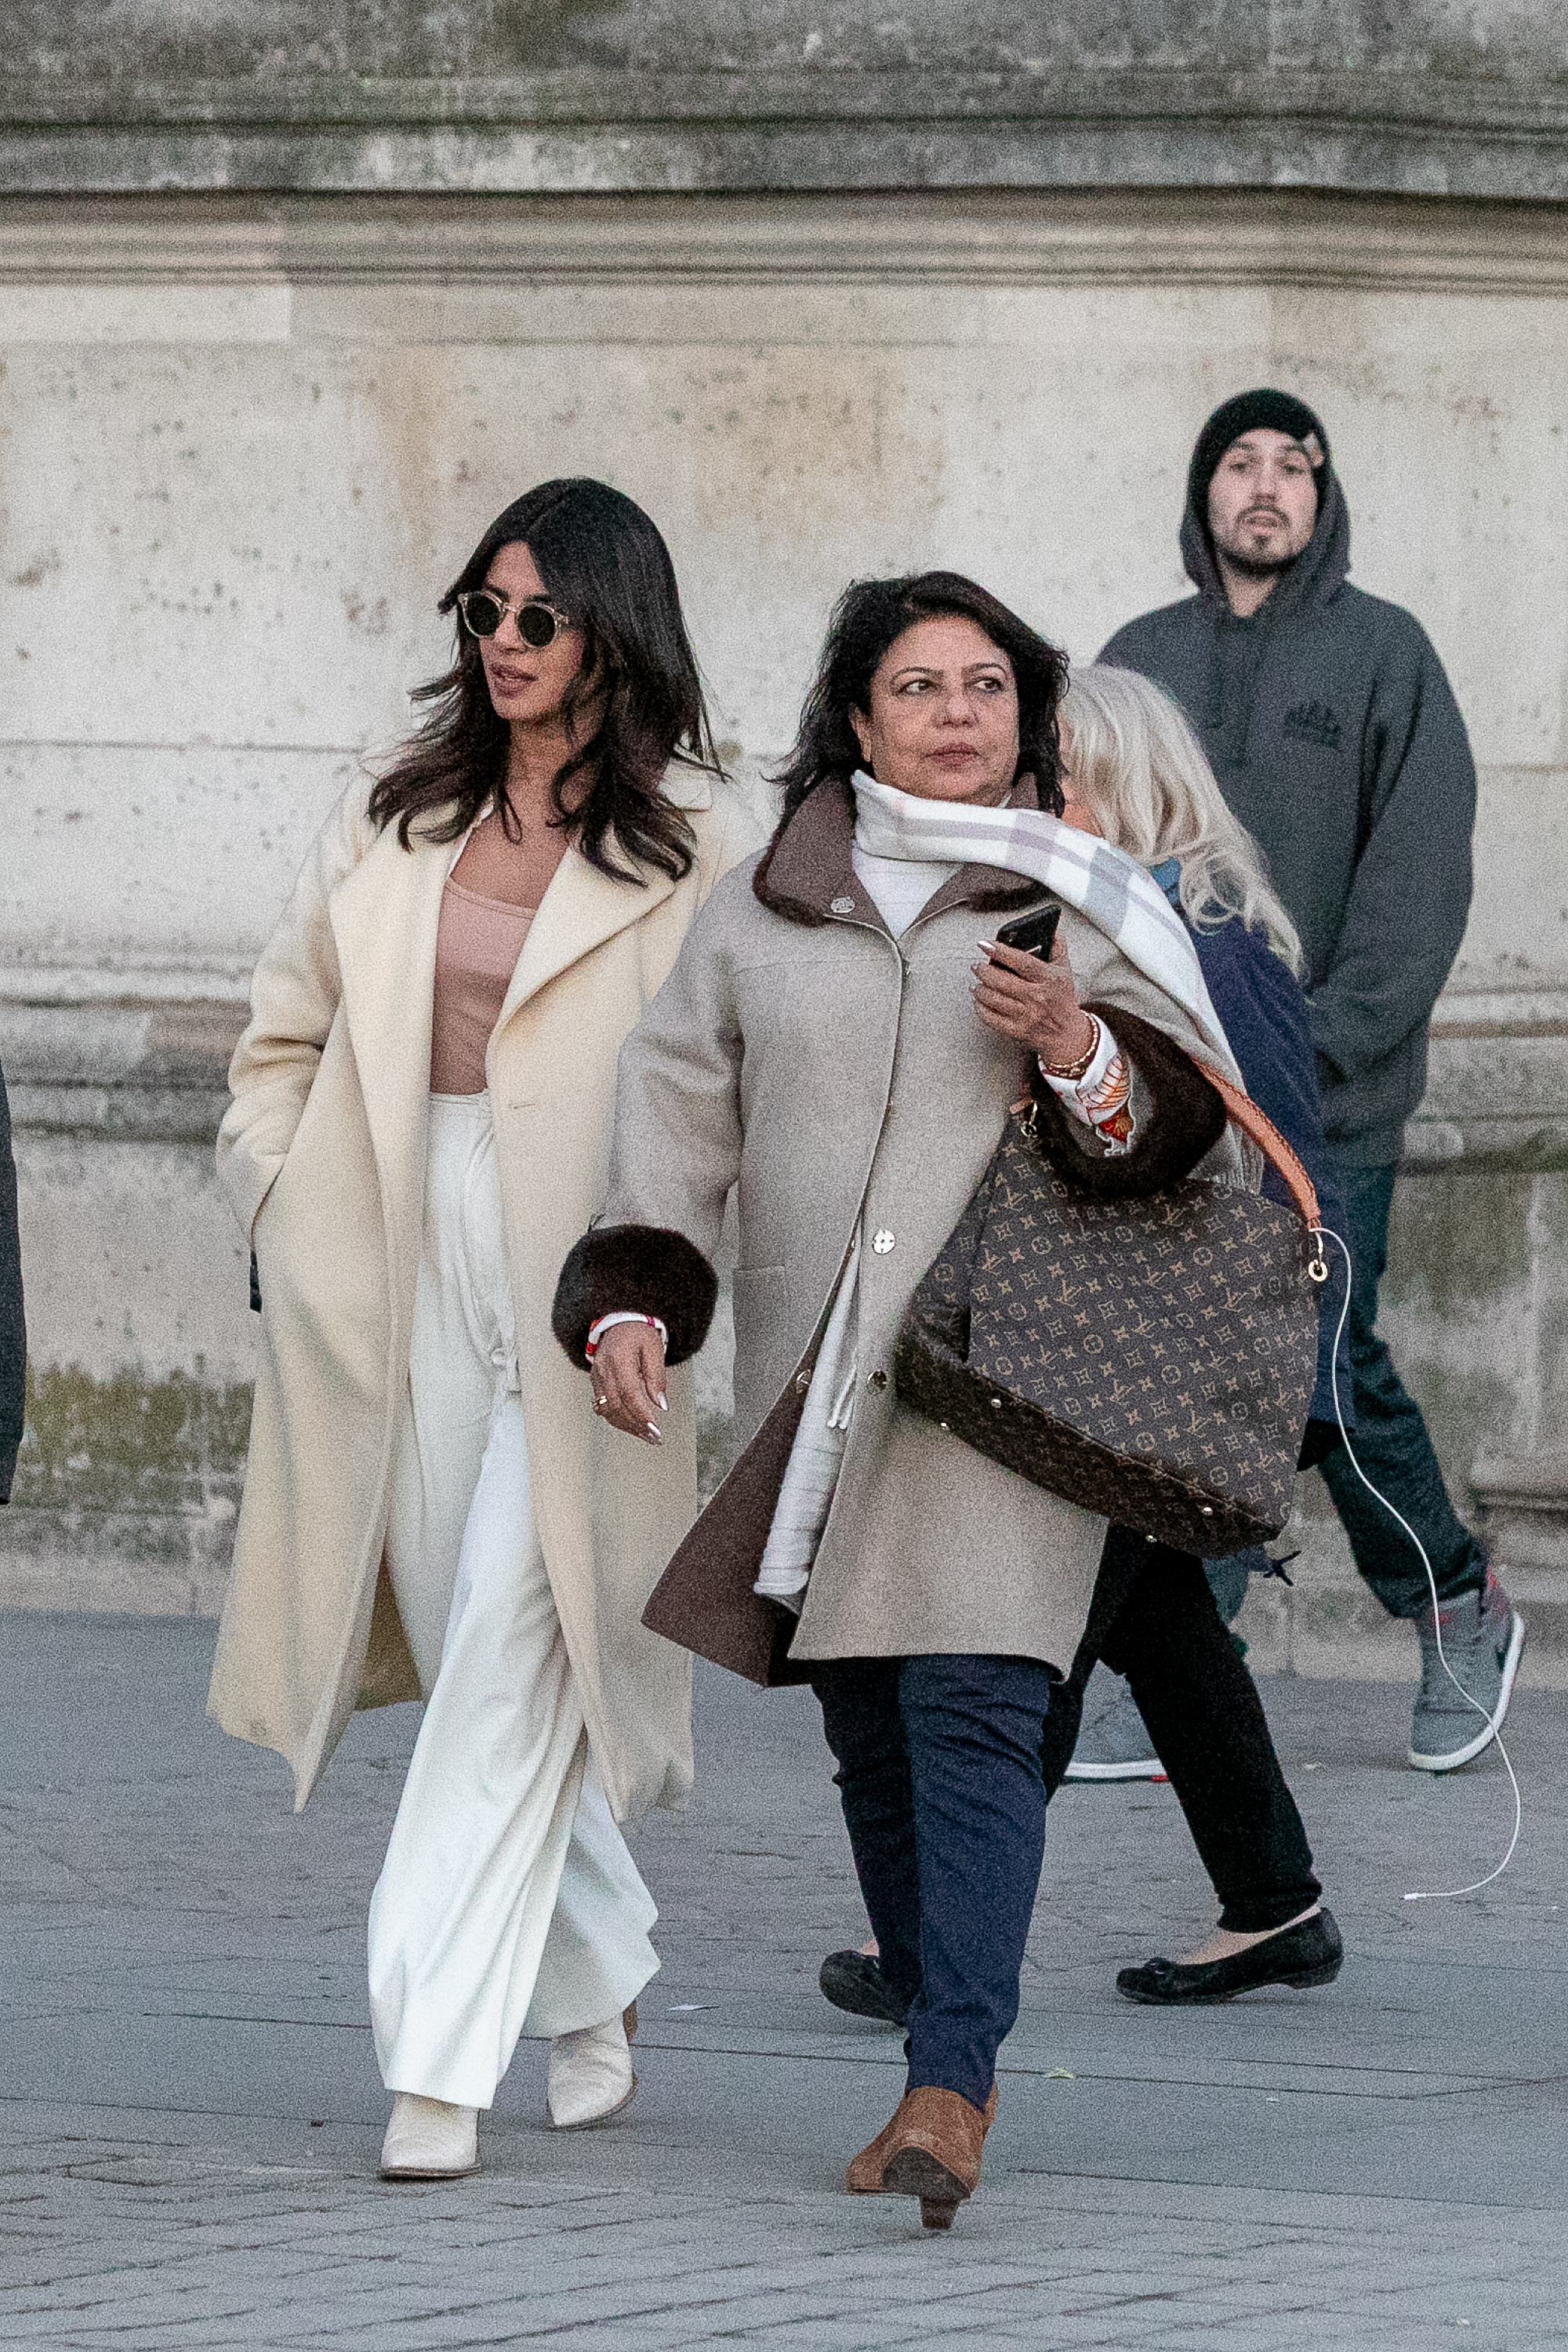 Priyanka Chopra and her mother Madhu Chopra are seen leaving the Cafe Marly, at Louvre museum, on November 18, 2018, in Paris, France. | Source: Getty Images